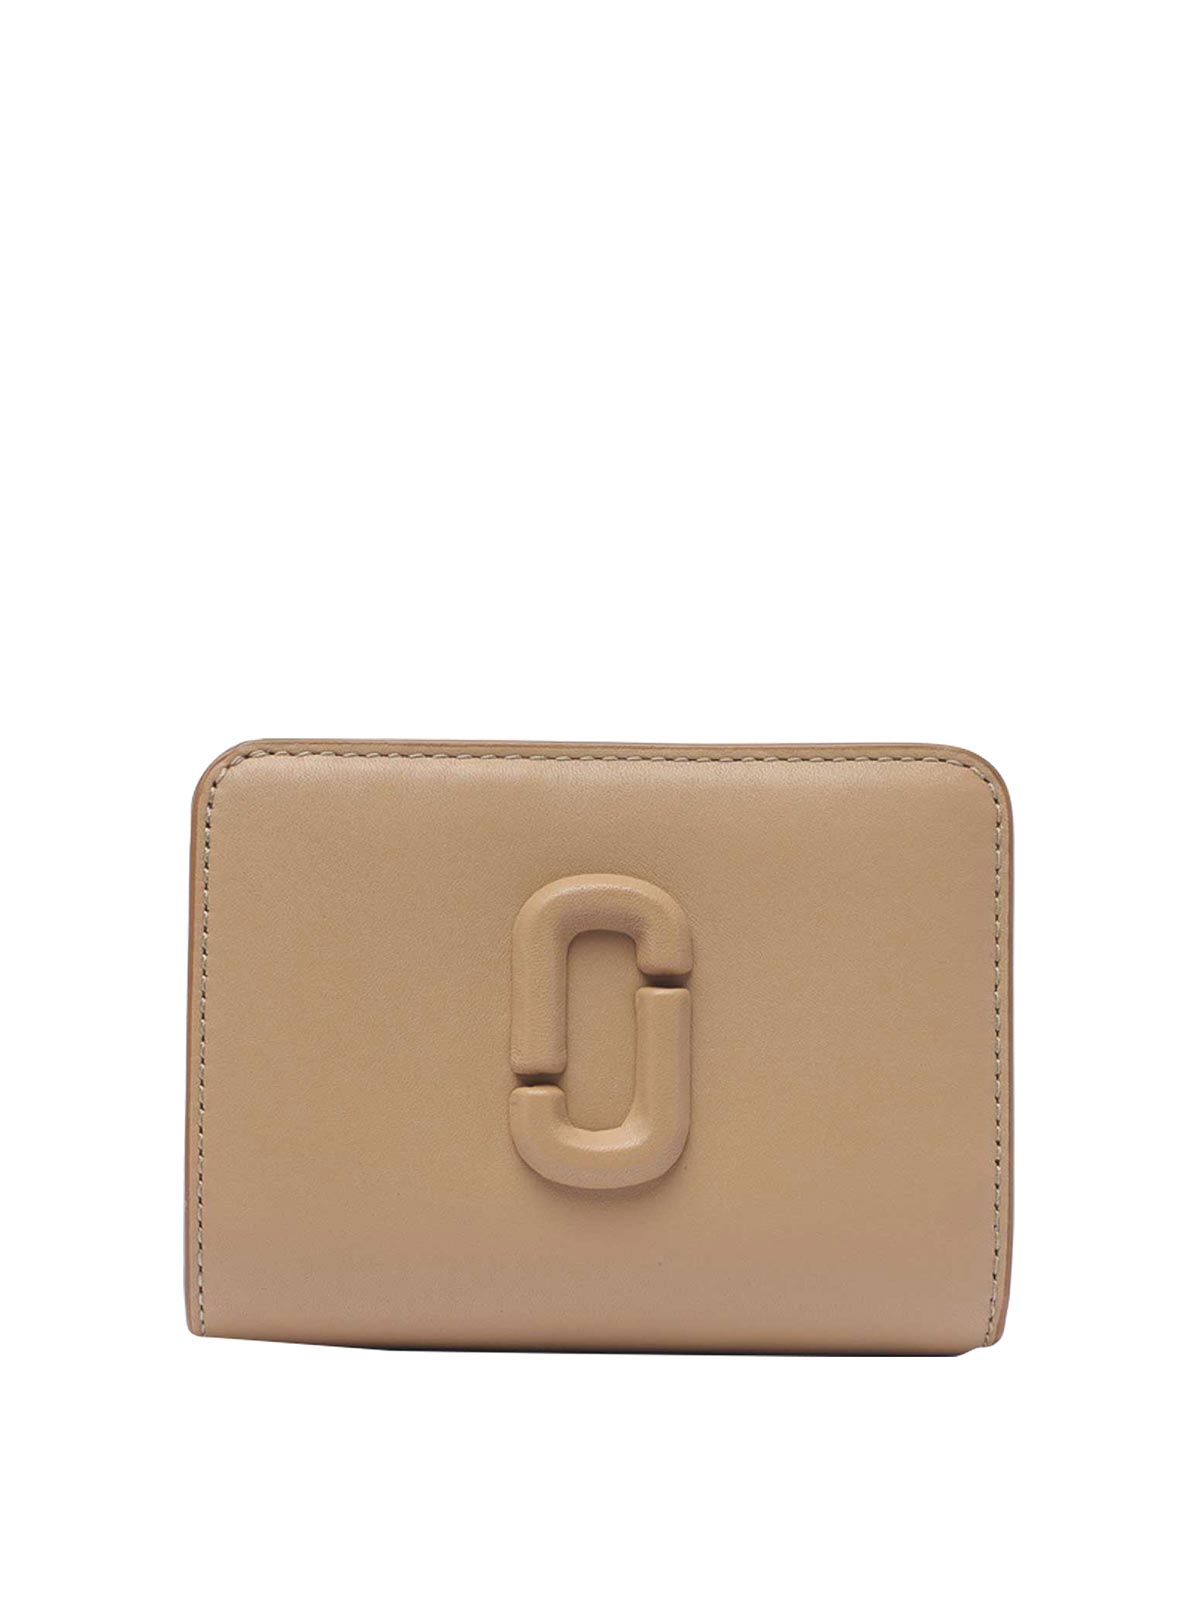 Marc Jacobs The Mini Compact Wallet In Neutral